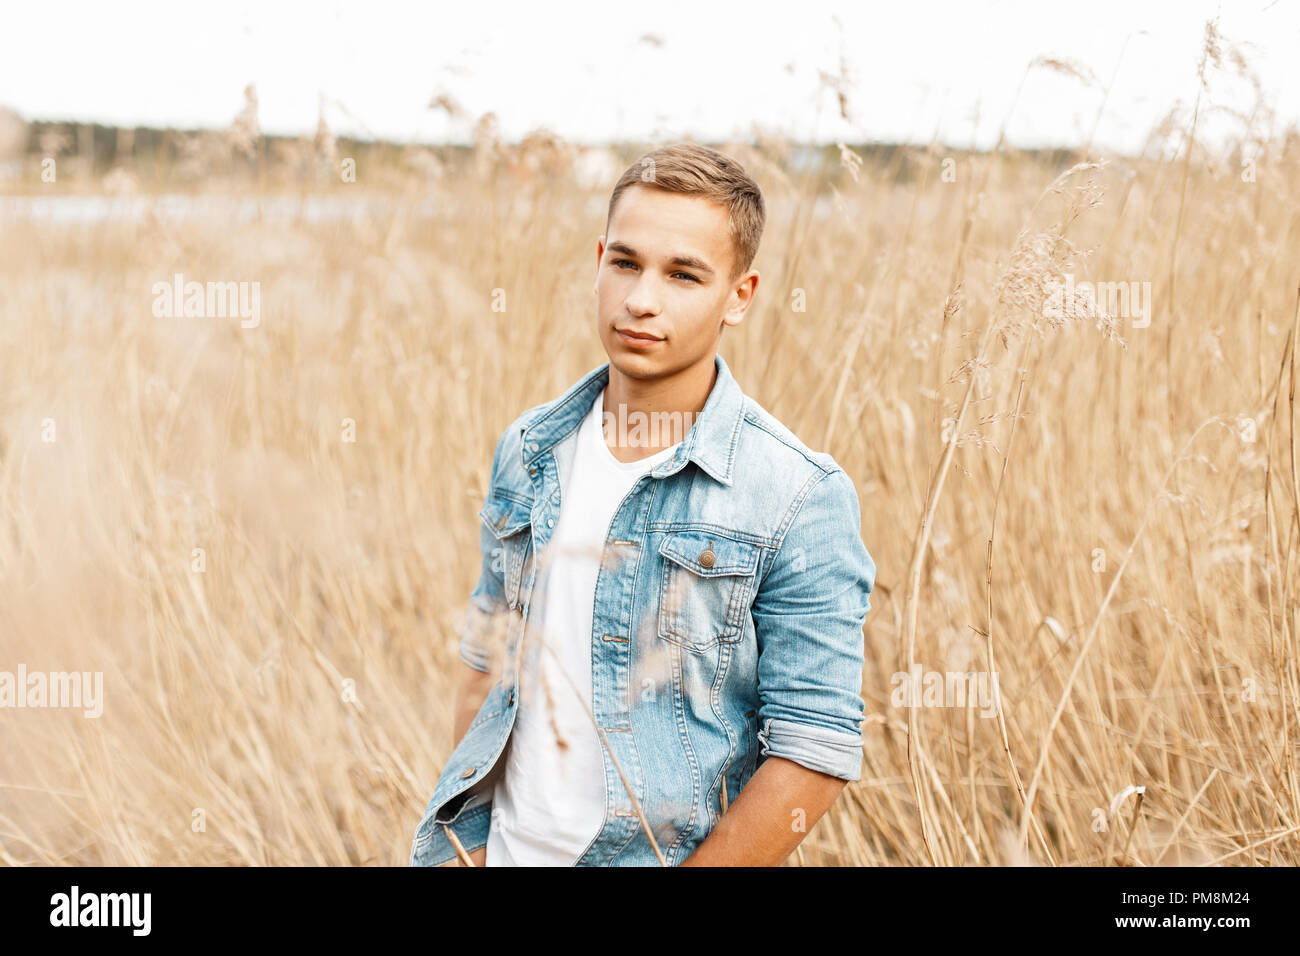 Handsome young man in a jeans jacket and a white T-shirt in dry grass walks in nature Stock Photo